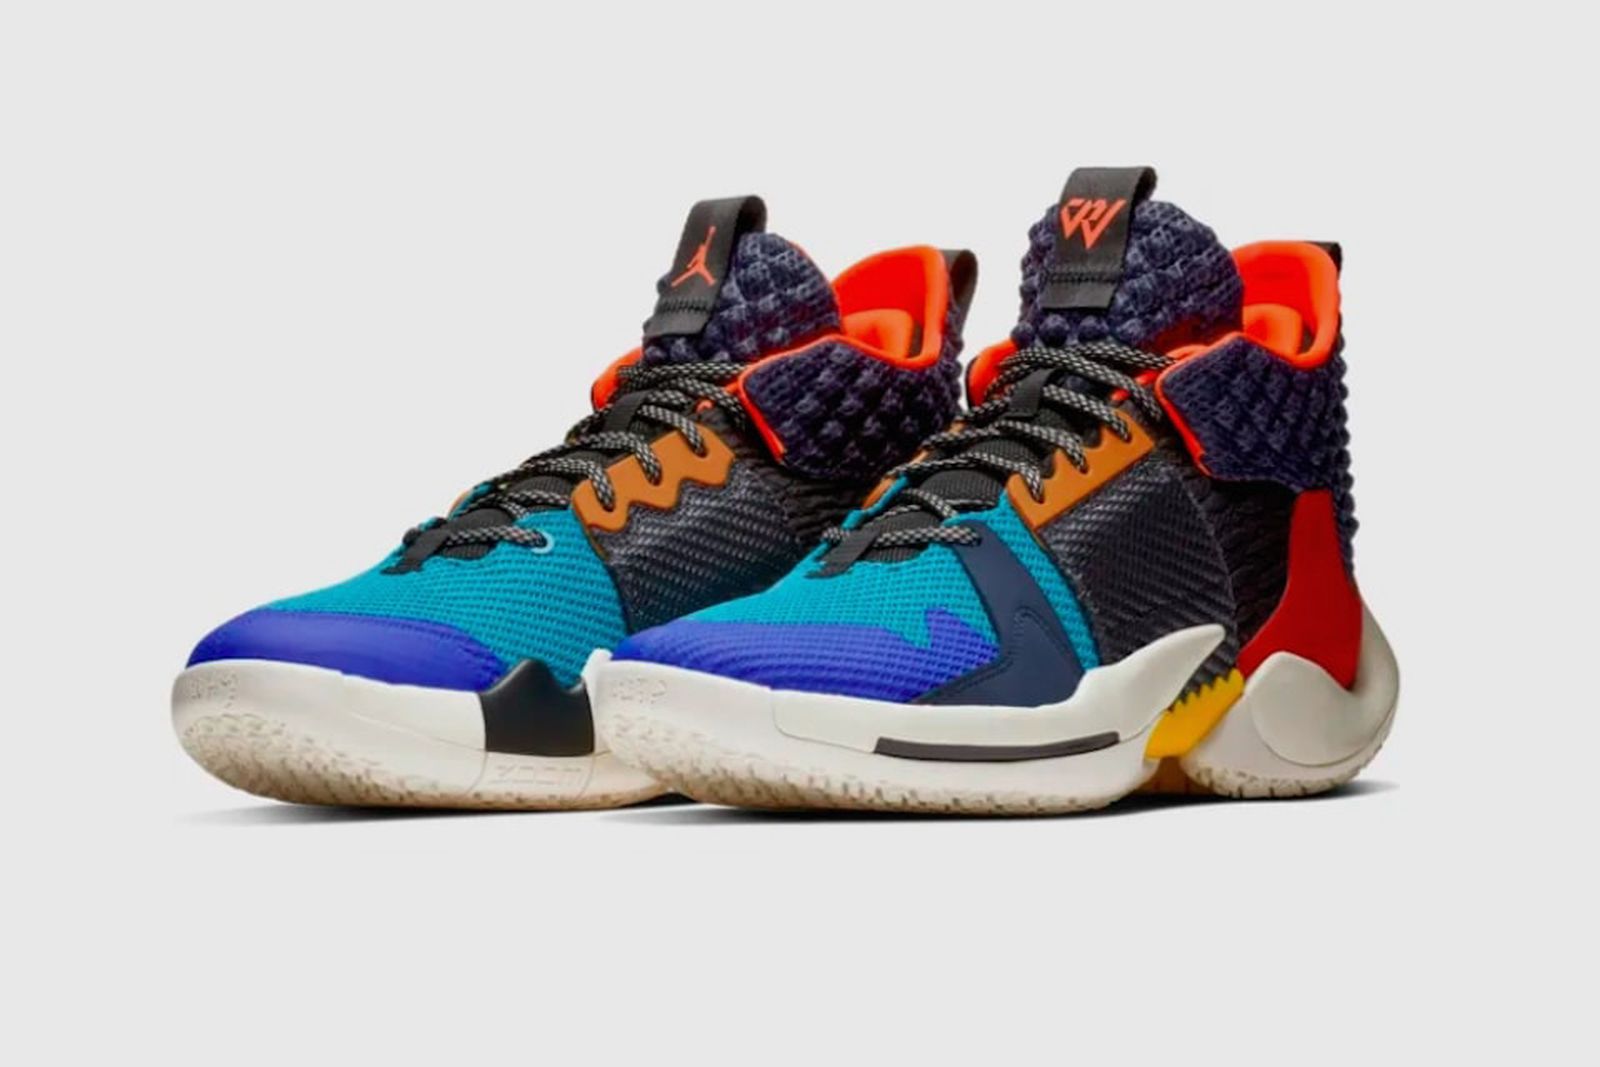 shampoo Admission fee Foreword Jordan Brand Russell Westbrook Why Not Zer0.2 "Future History": Release  Date, Pricing & More Info